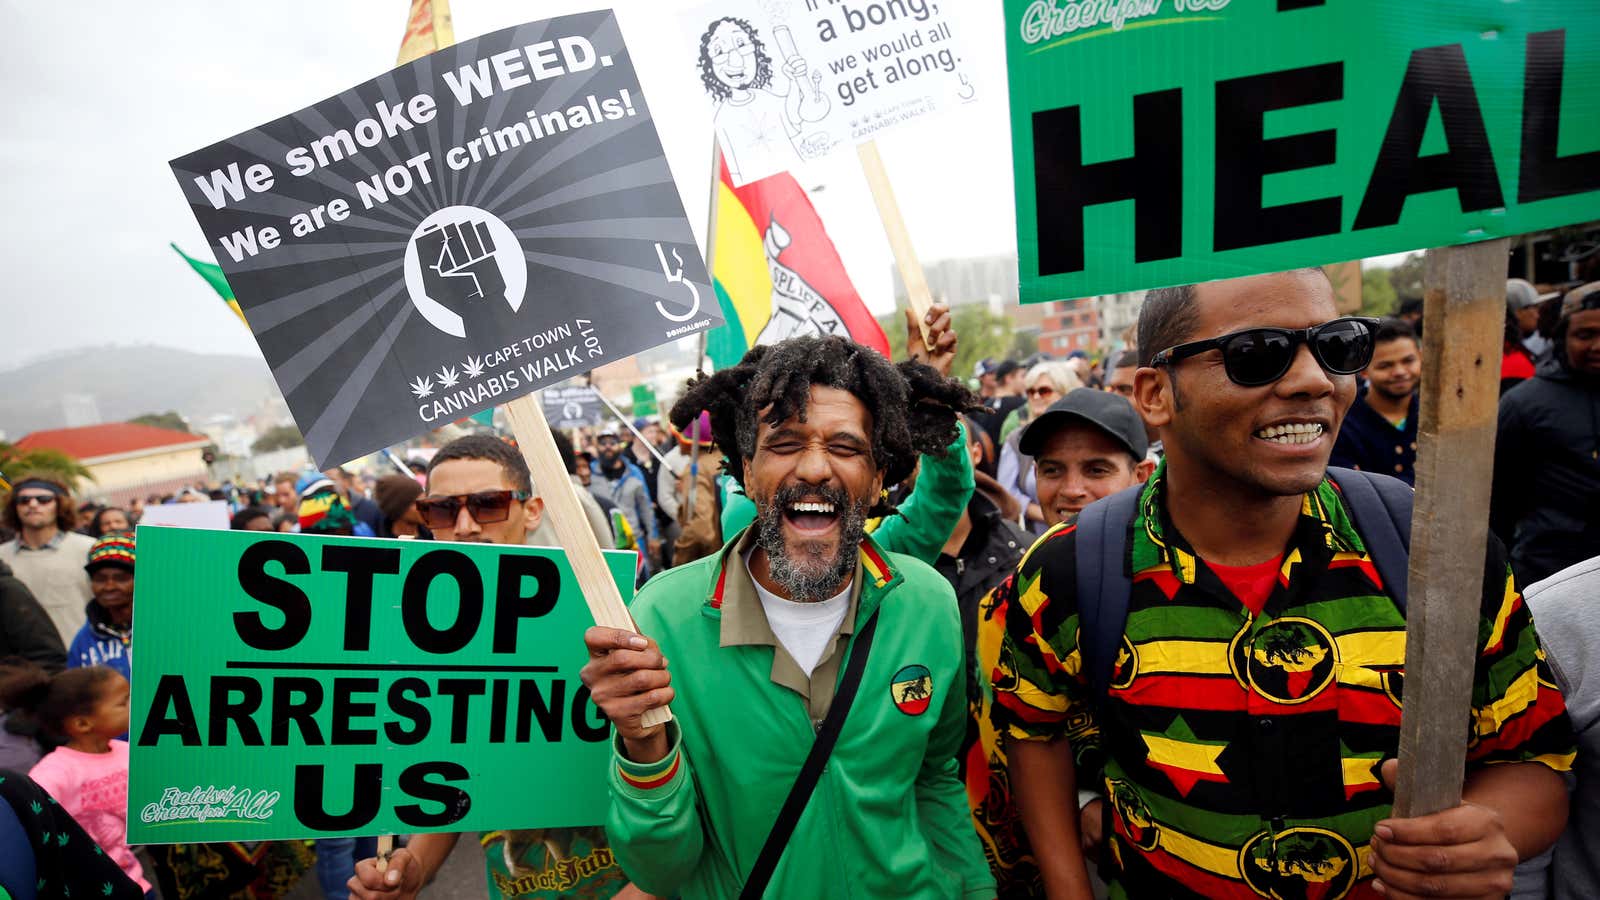 Demonstrators hold placards during a 2017 march calling for the legalization of cannabis in South Africa.